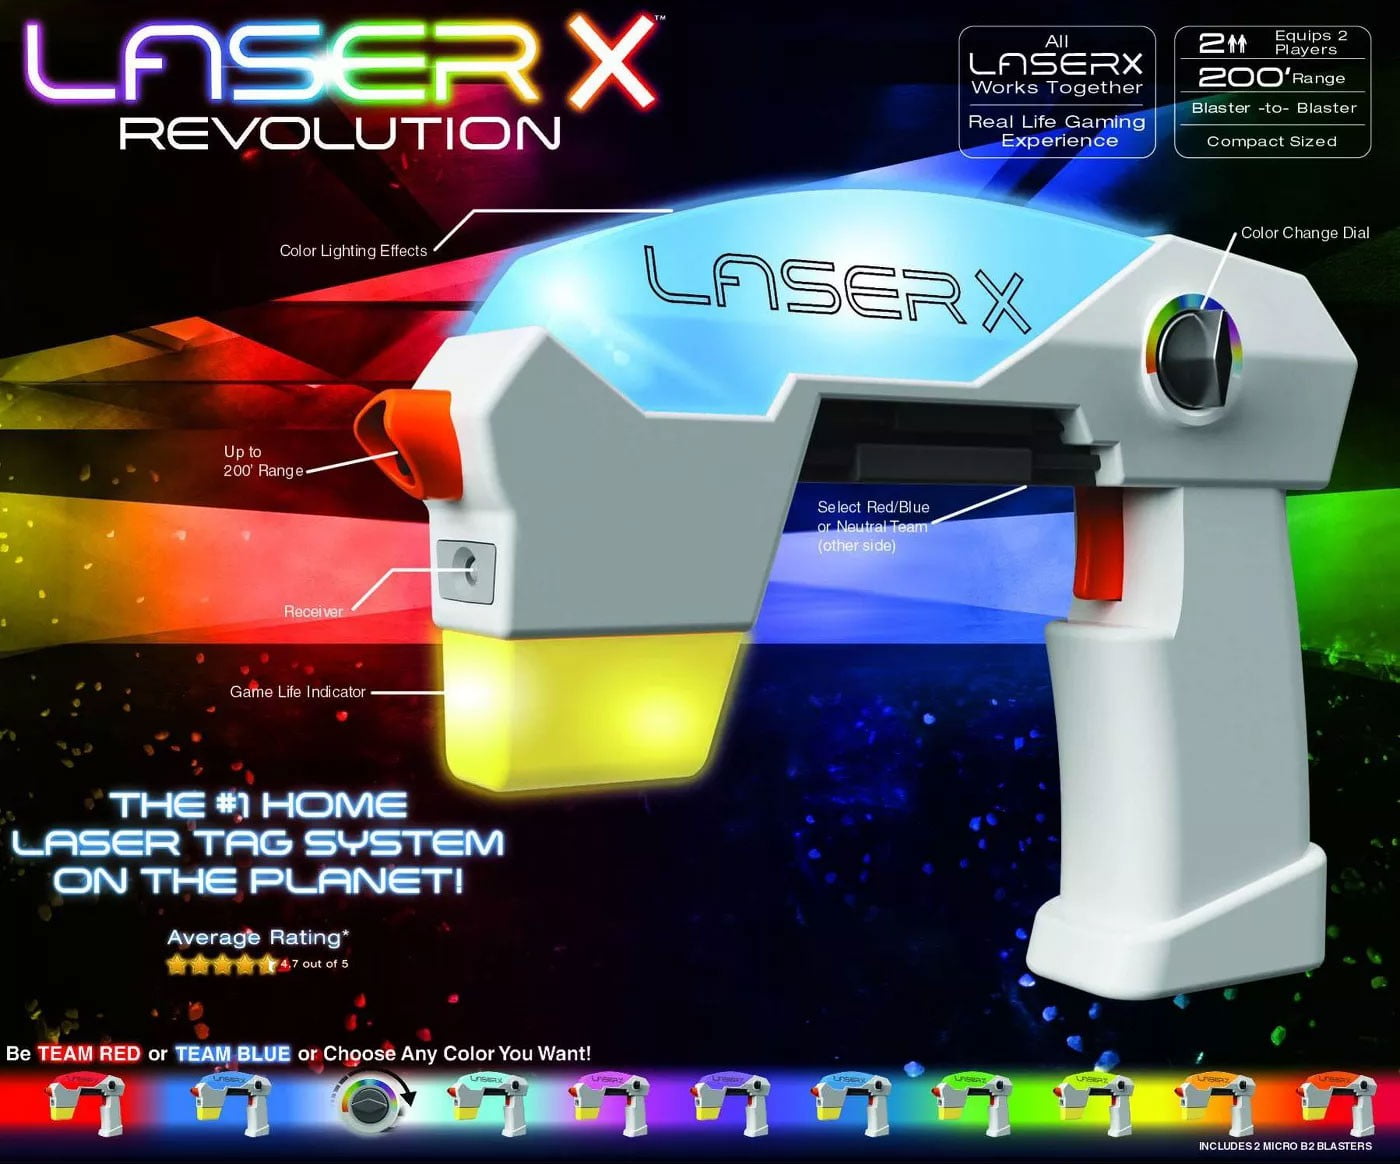 Two Player Electronic Laser Tag Game From Blakjax Retails for